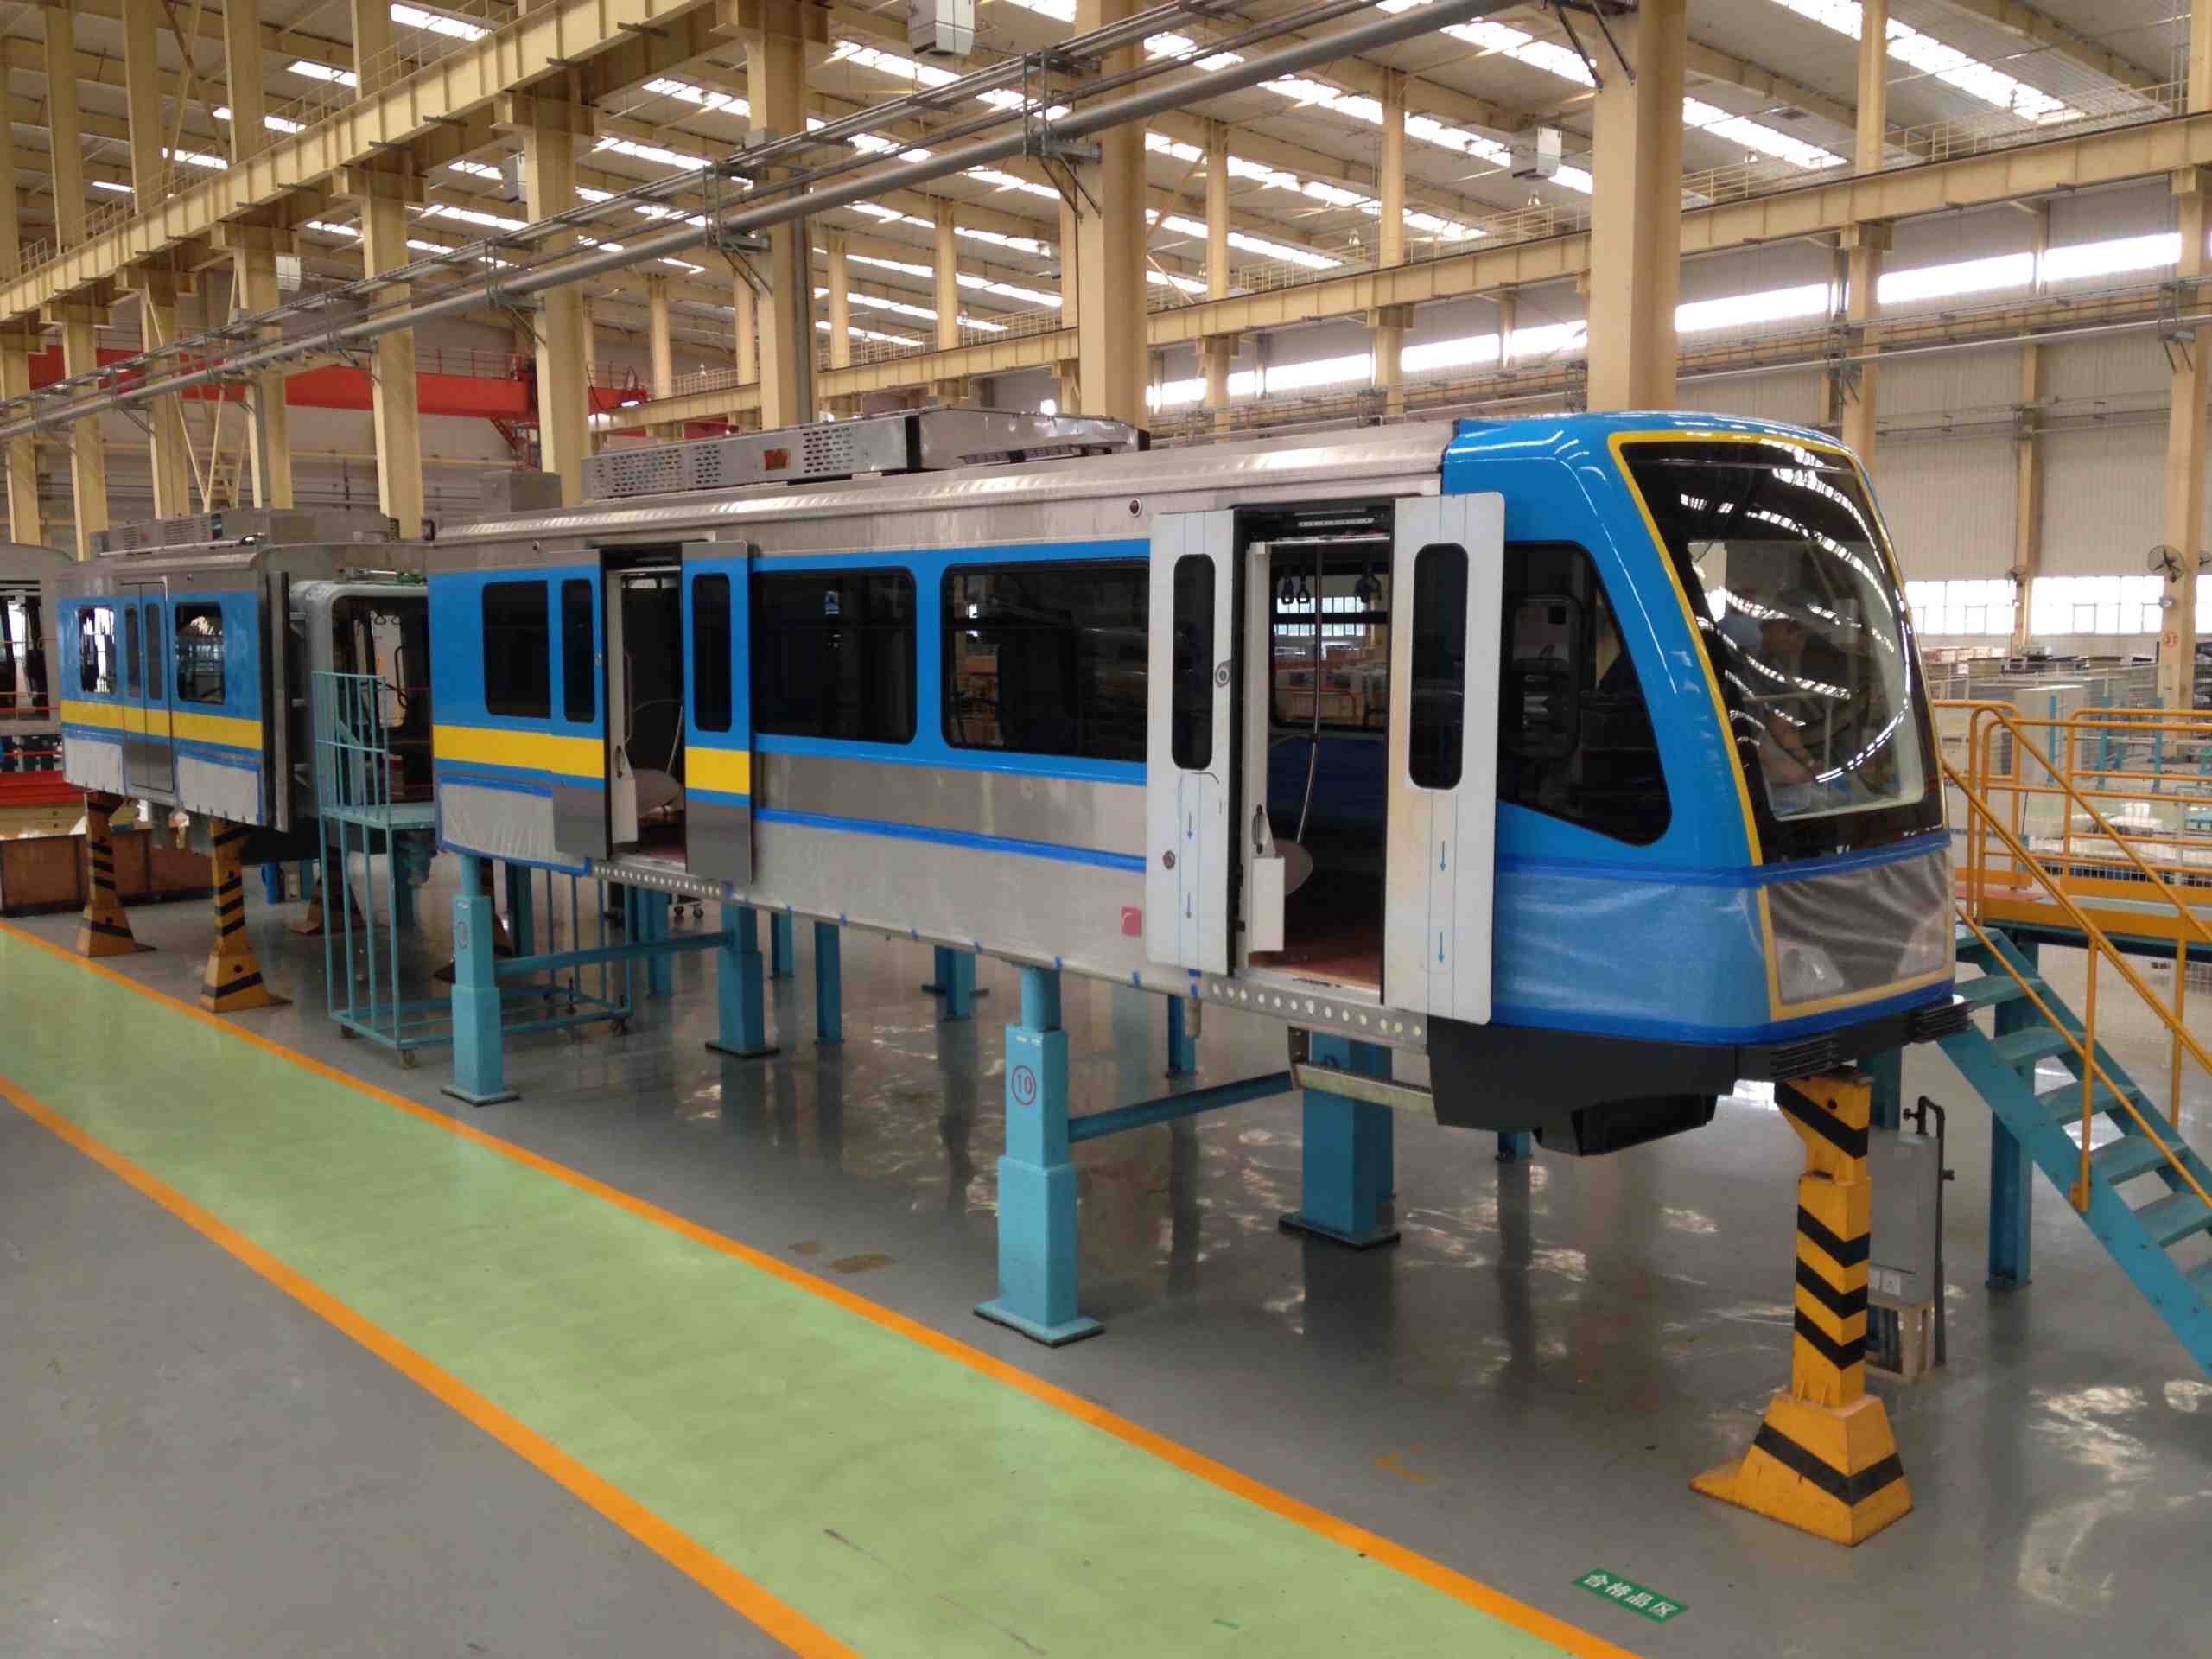 BETTER SERVICE? One of the Dalian MRT3 train cars that will be delivered as part of the DOTC's MRT3 capacity expansion project. Photo from DOTC 